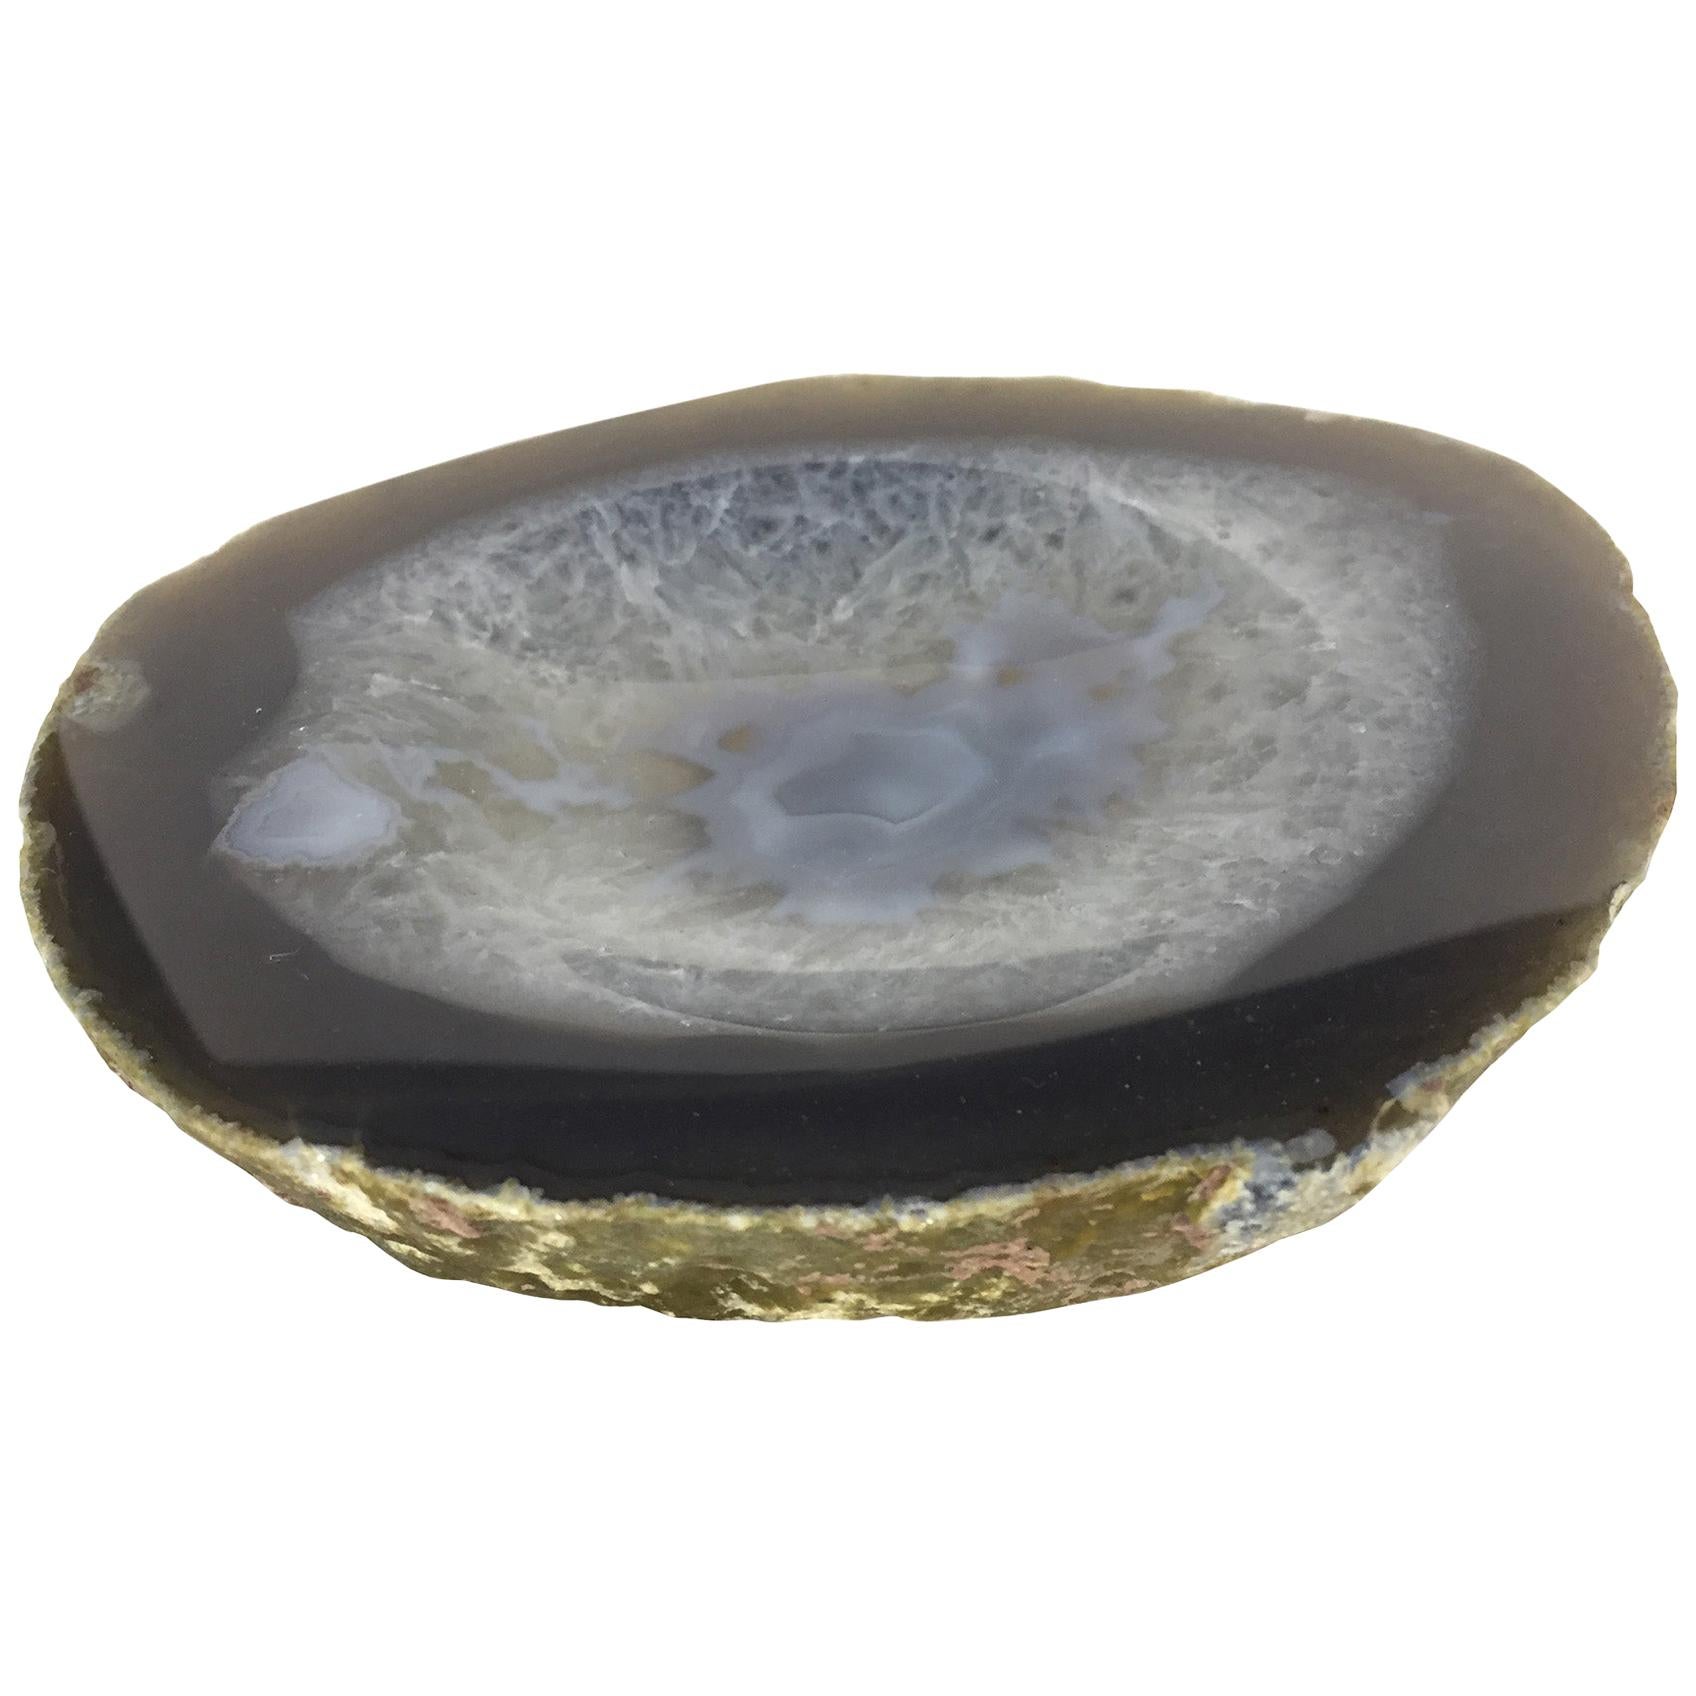 Ana Agate Trinket Dish in Natural Stone by CuratedKravet